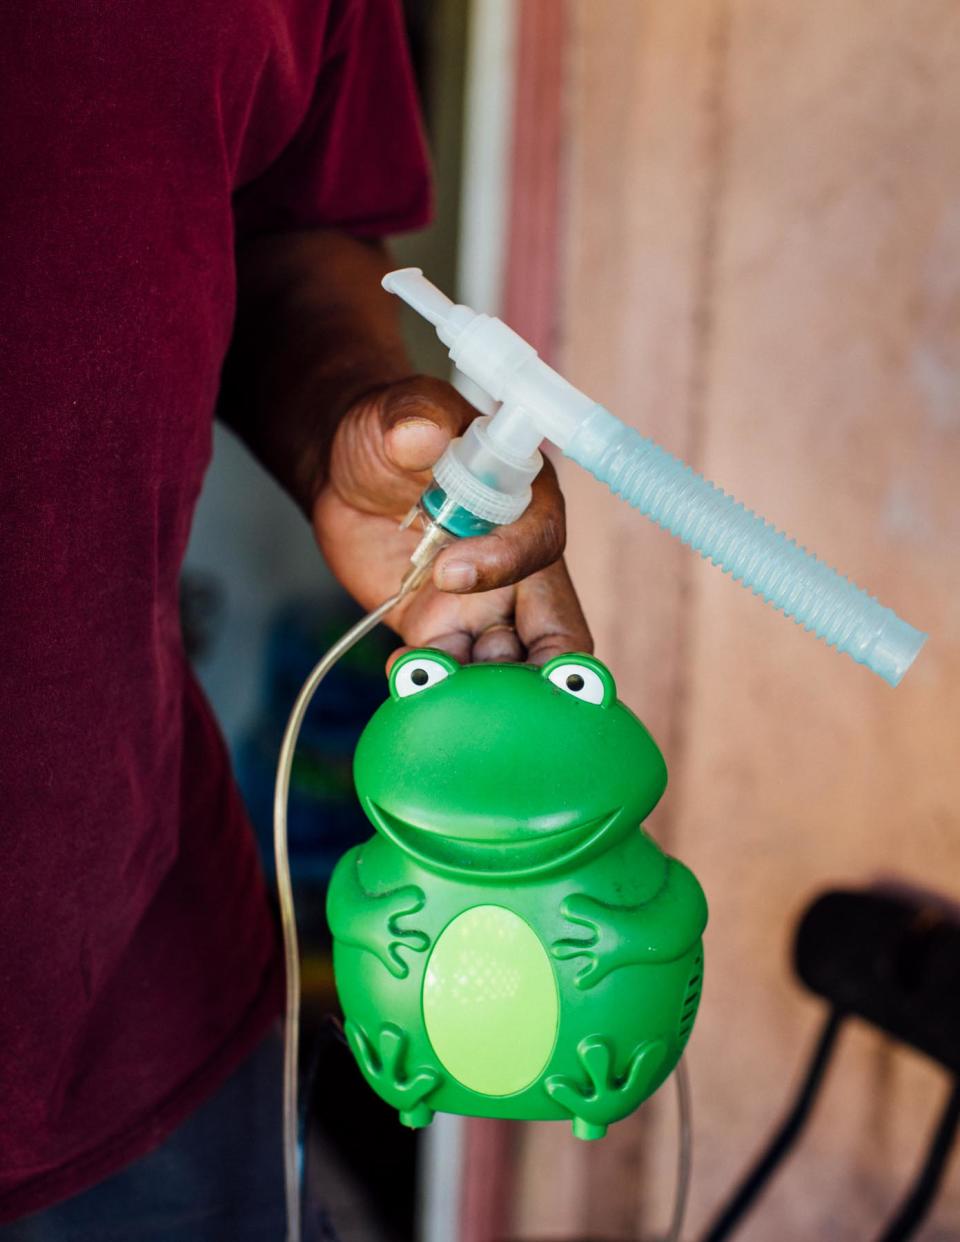 Ed Jones holds the nebulizer used by his teenage granddaughter. His whole family deals with respiratory issues while living close to burning cane in Pahokee, Florida.